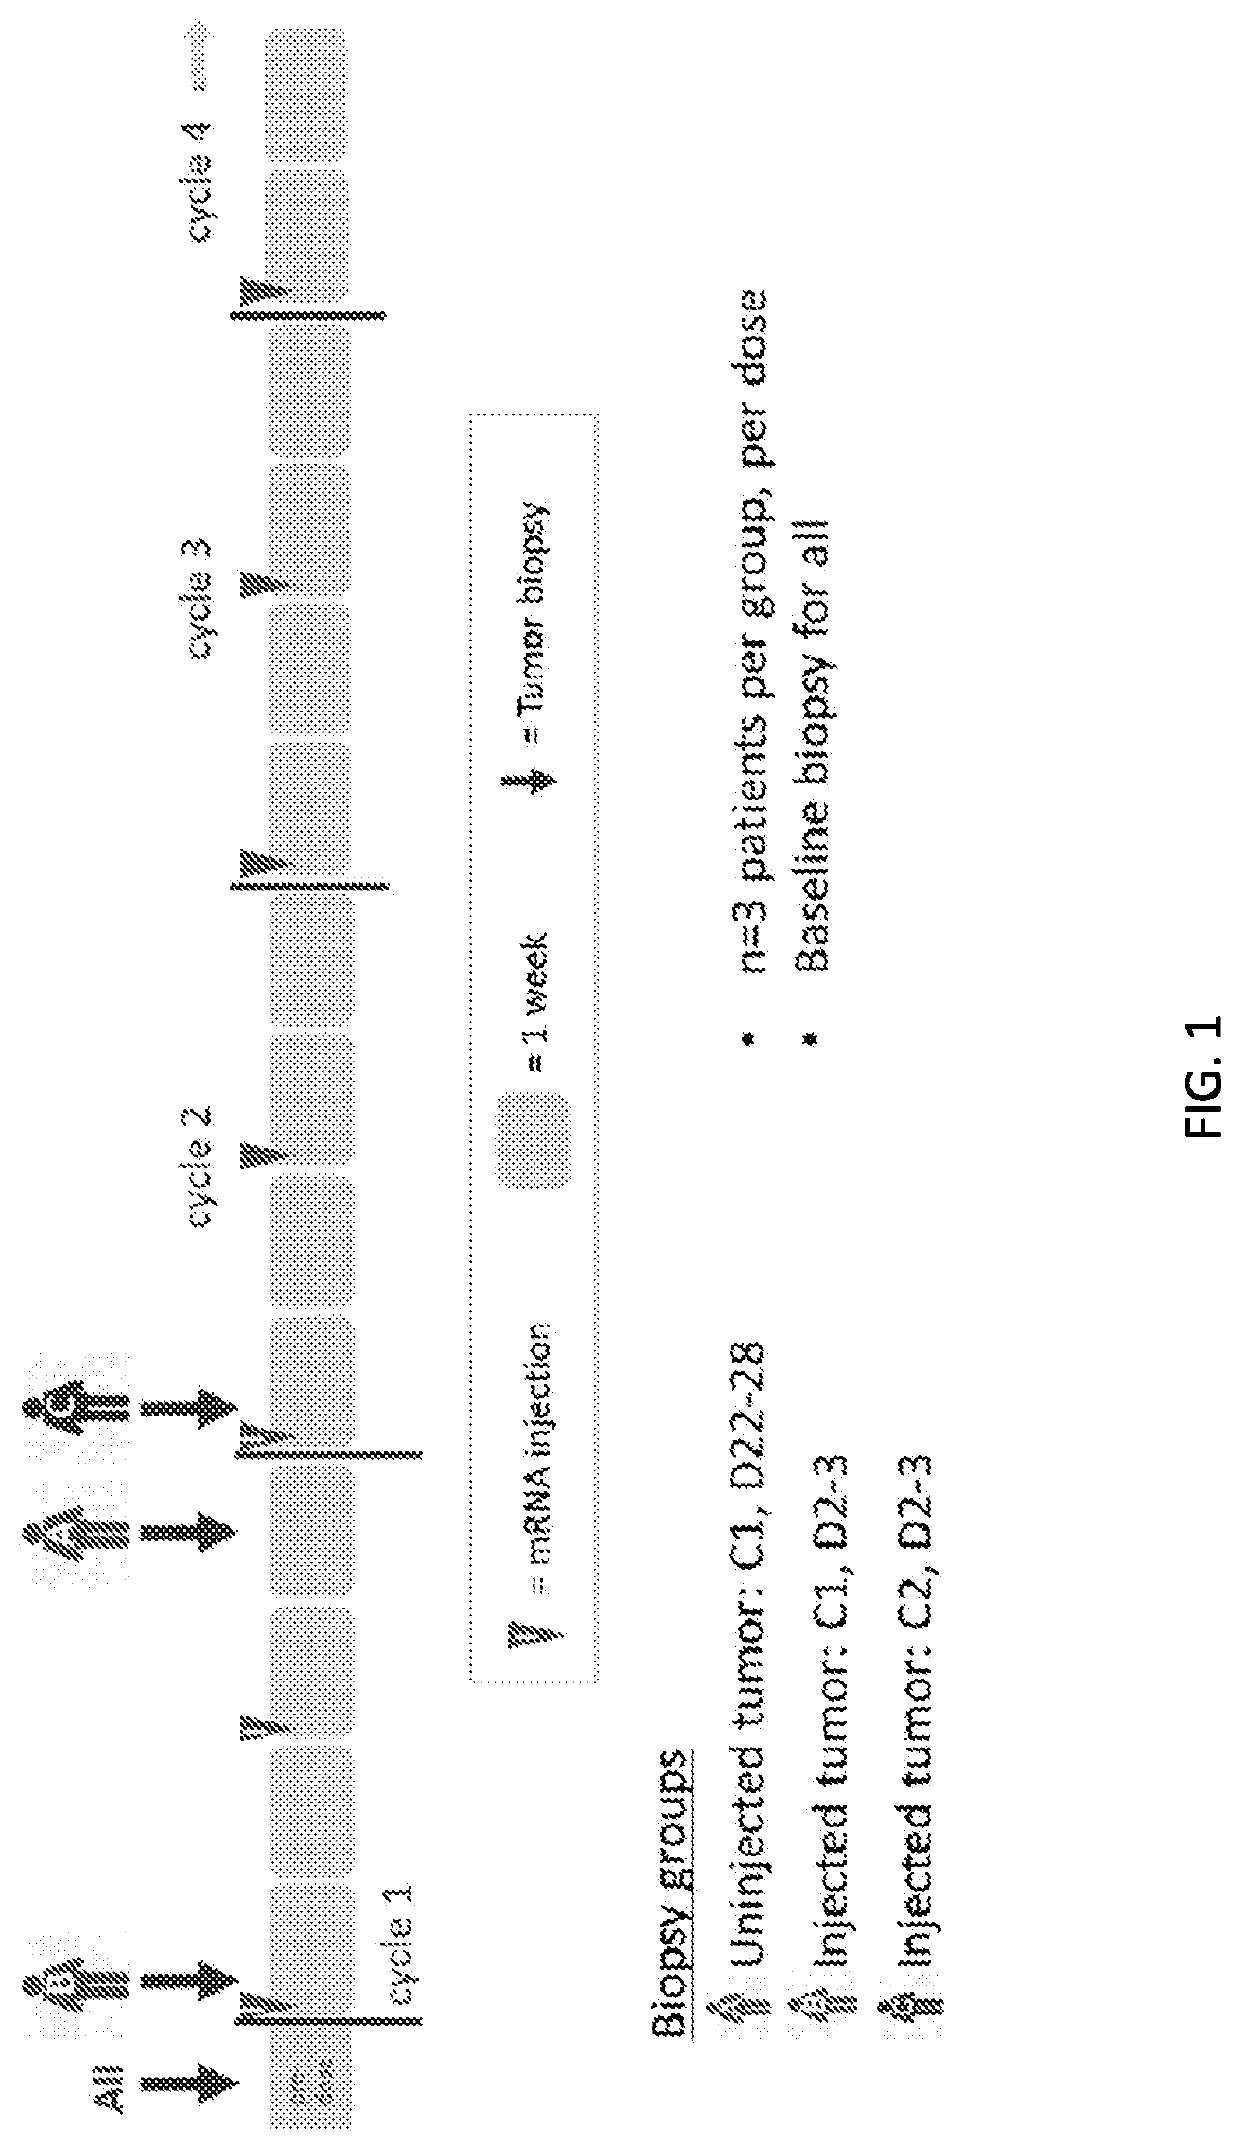 Use of mRNA encoding ox40l to treat cancer in human patients